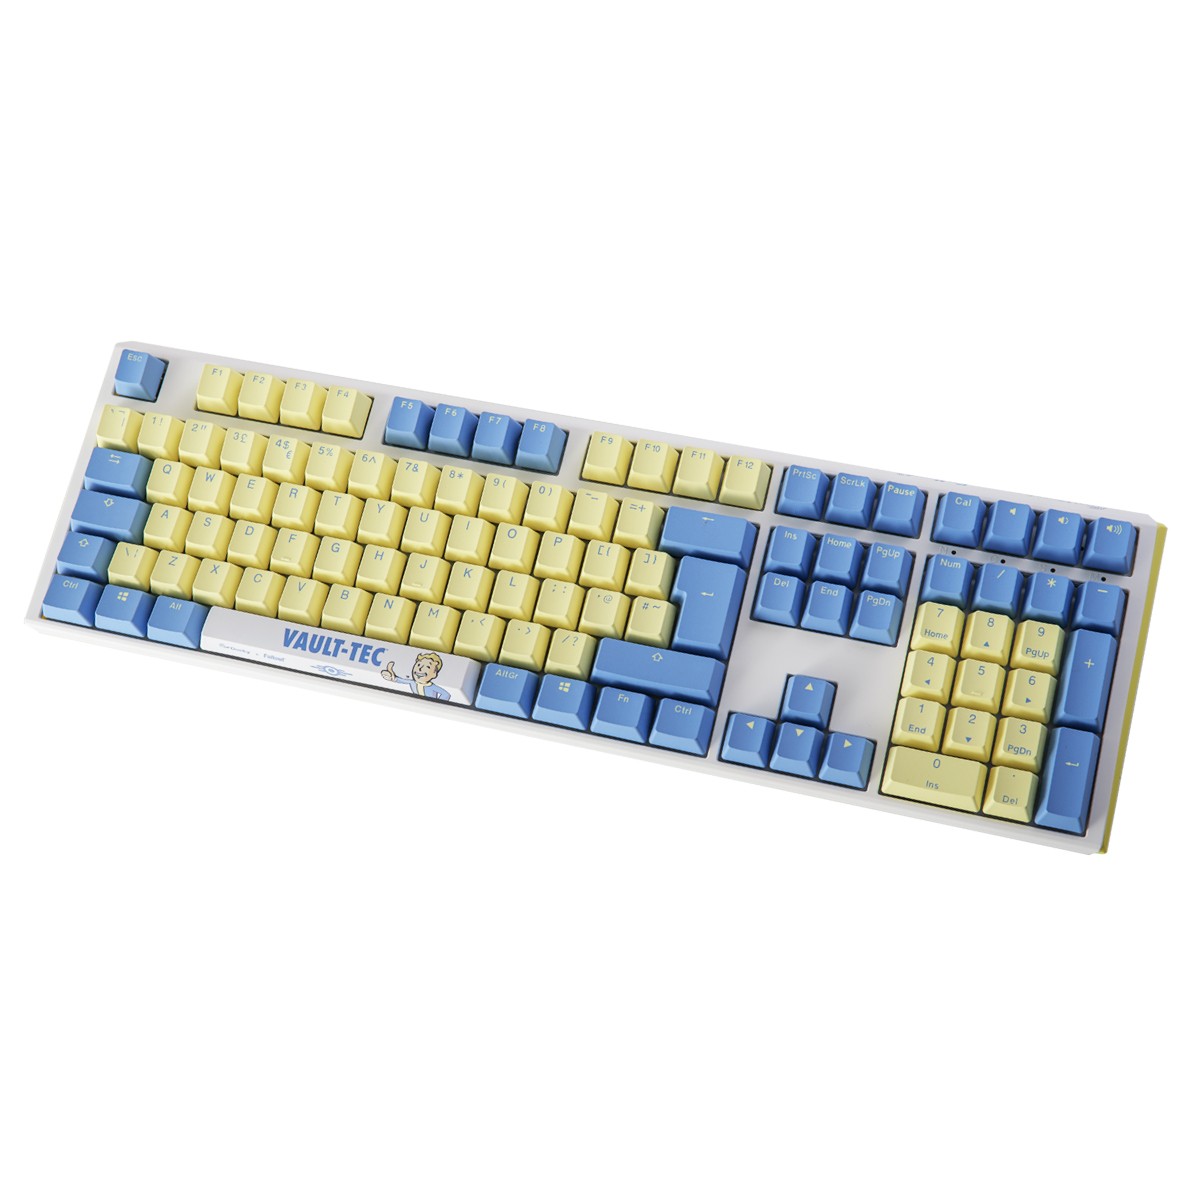 Ducky - Ducky x Fallout One 3 RGB LE Cherry Silent Red Switch Mechanical Gaming Keyboard UK Layout